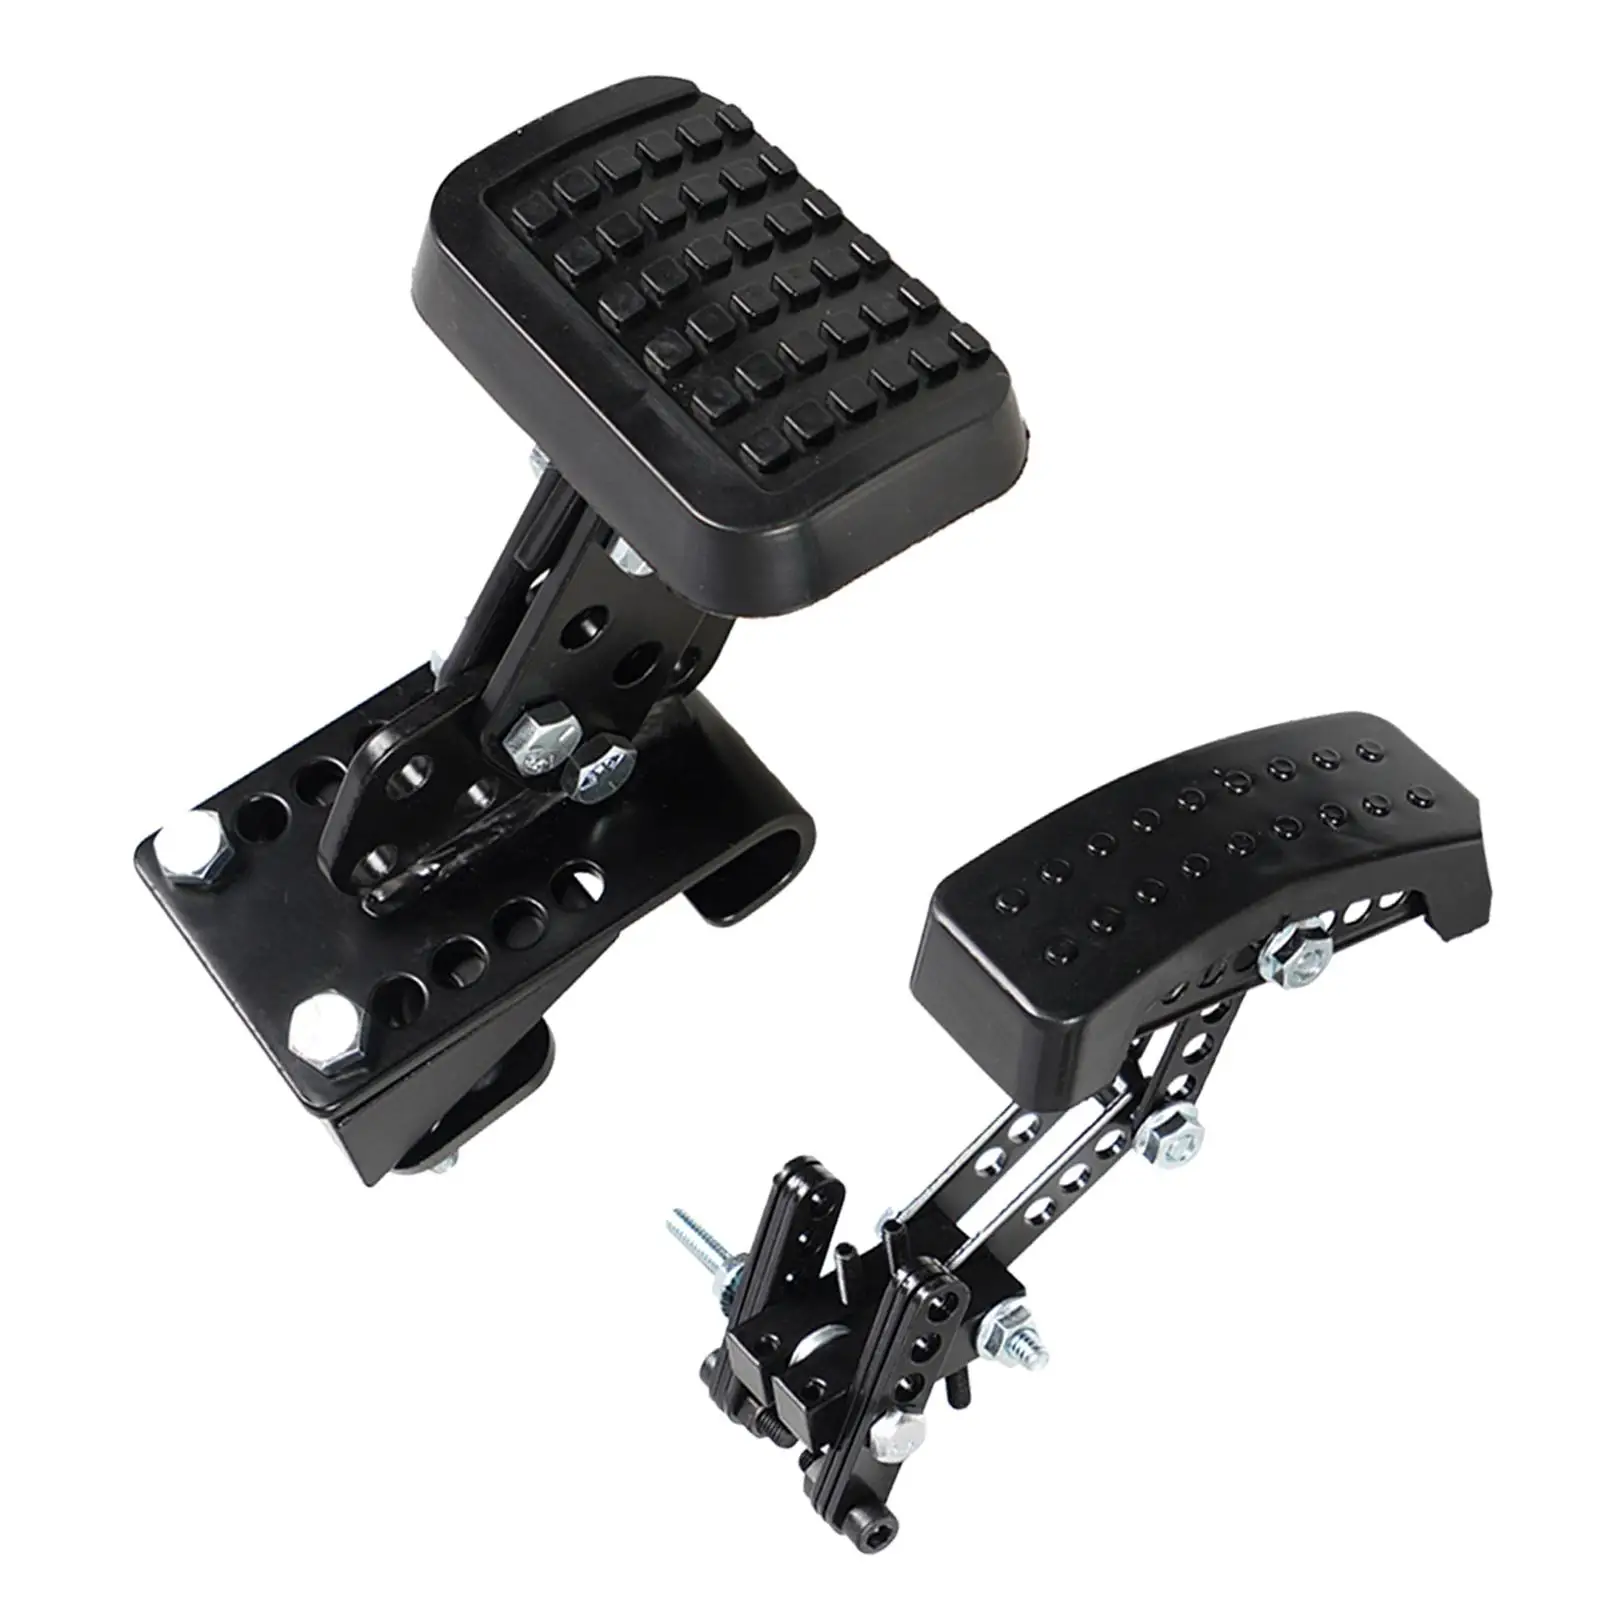 Brake and Pedals Extender Pedal Extension Enlarge car Anti Slip Pedal for Modification Accessories Replaces